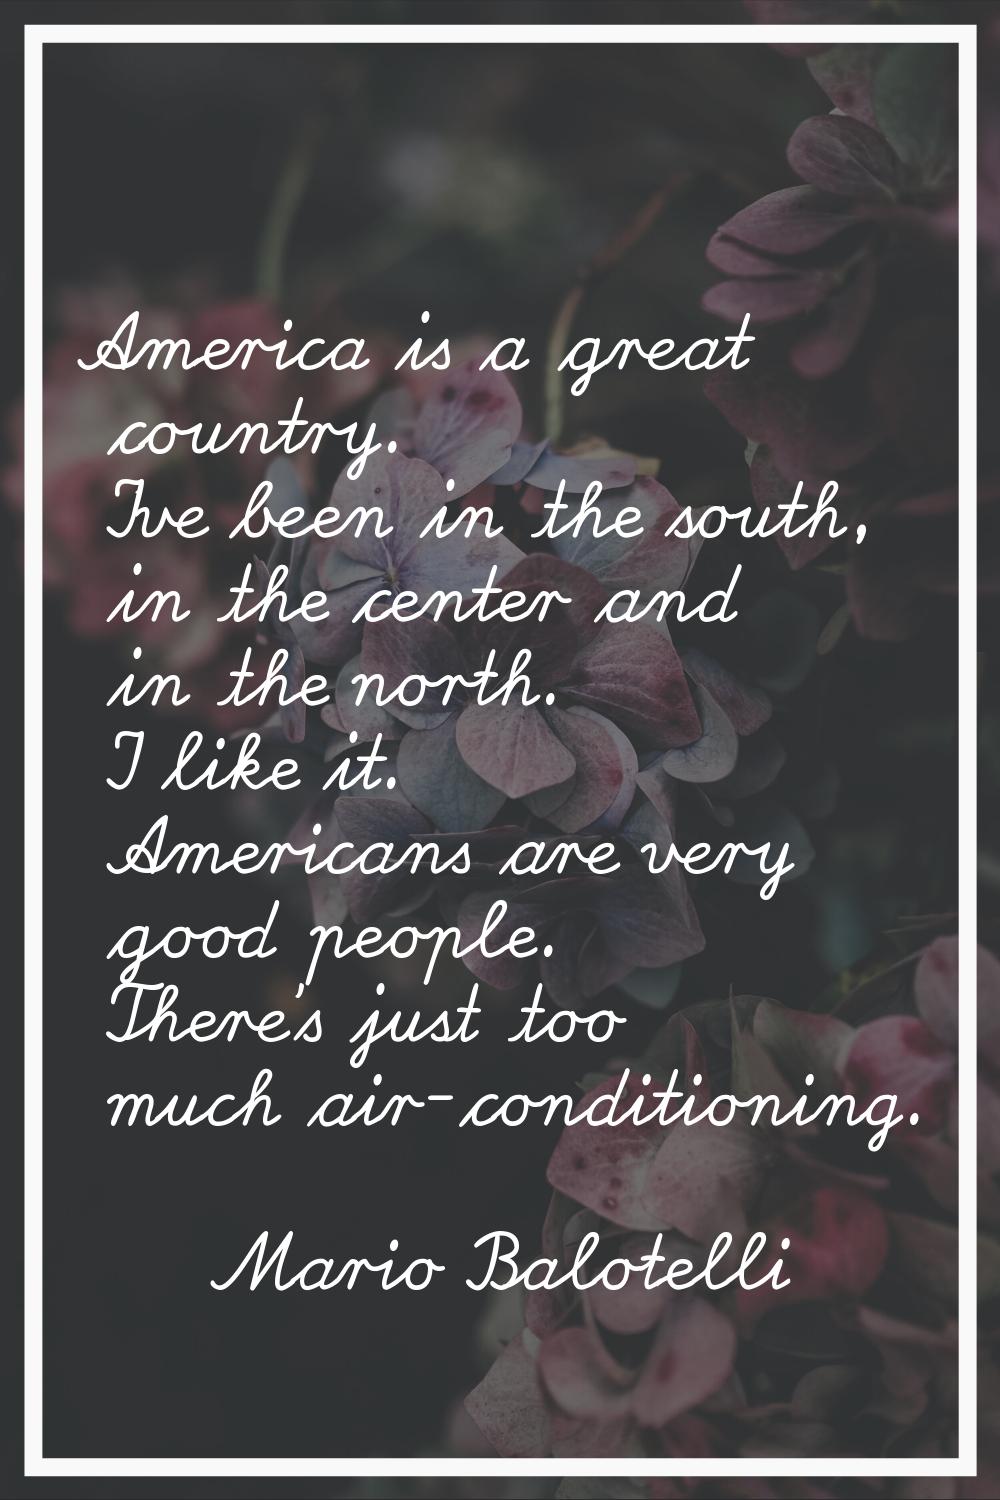 America is a great country. I've been in the south, in the center and in the north. I like it. Amer